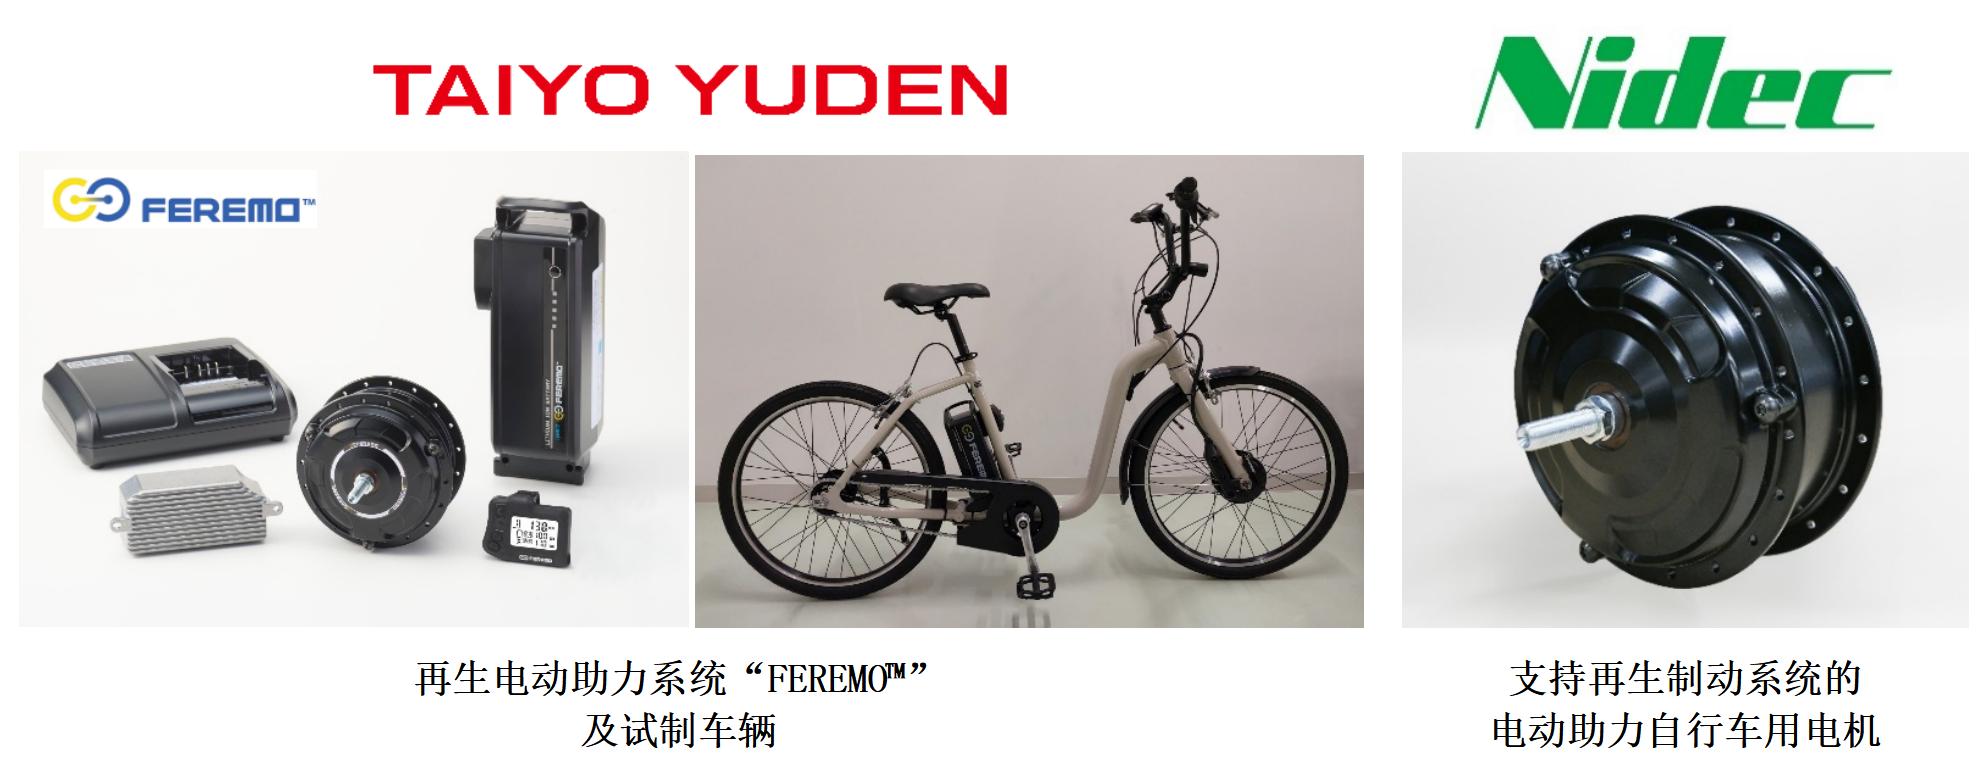  The motor product developed by NIDECO is fully charged with an electric bicycle that can cycle 1000 km at a time